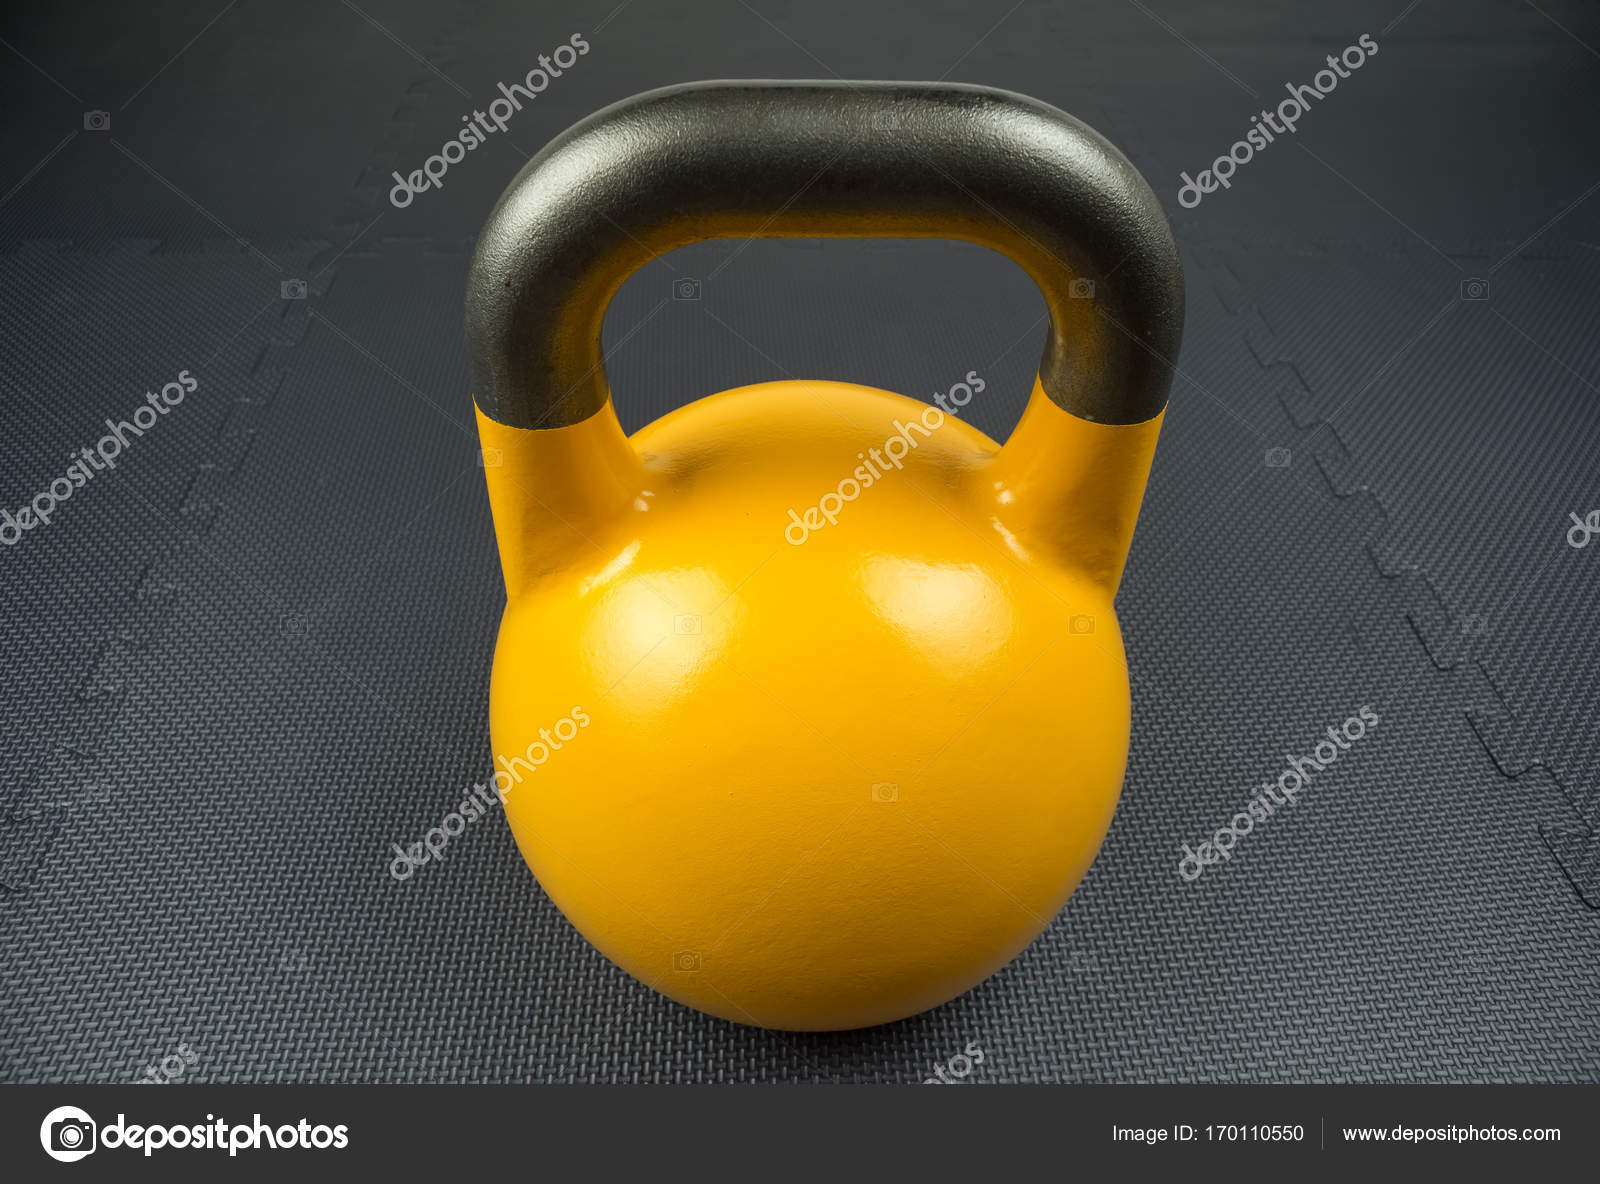 competition kettlebell on floor Photo by ©RuPhoto 170110550